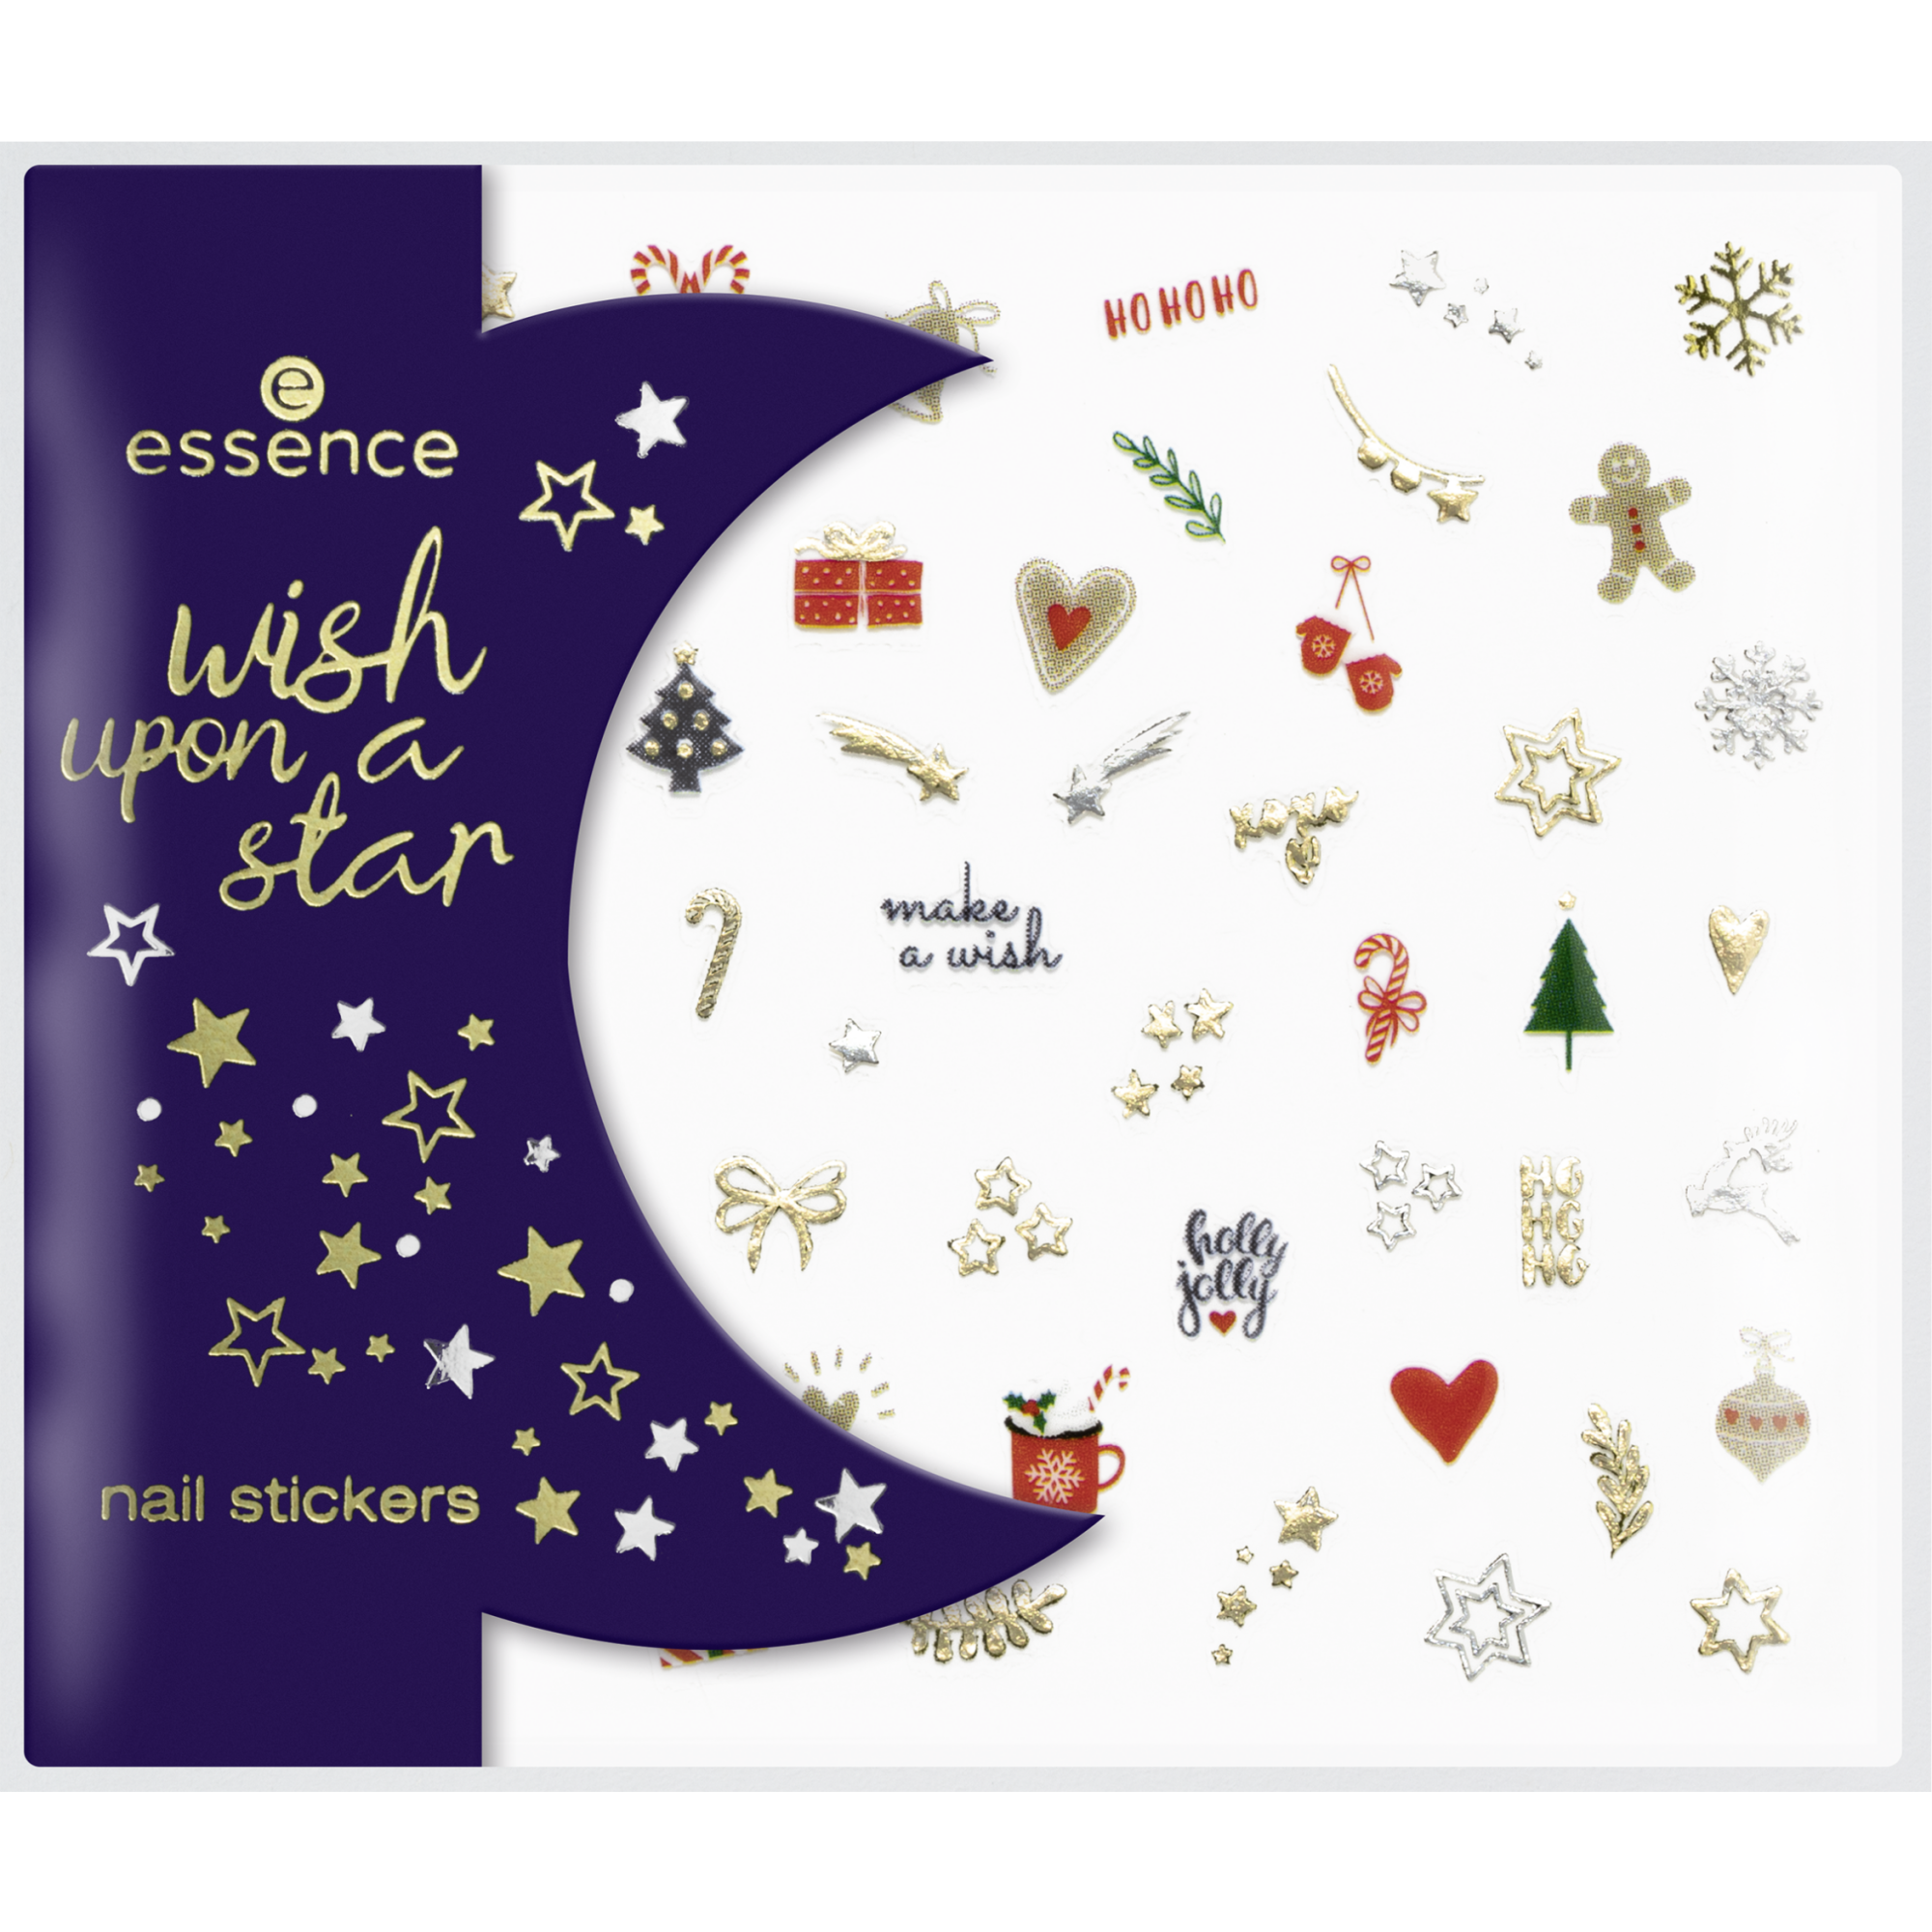 wish upon a star nail stickers